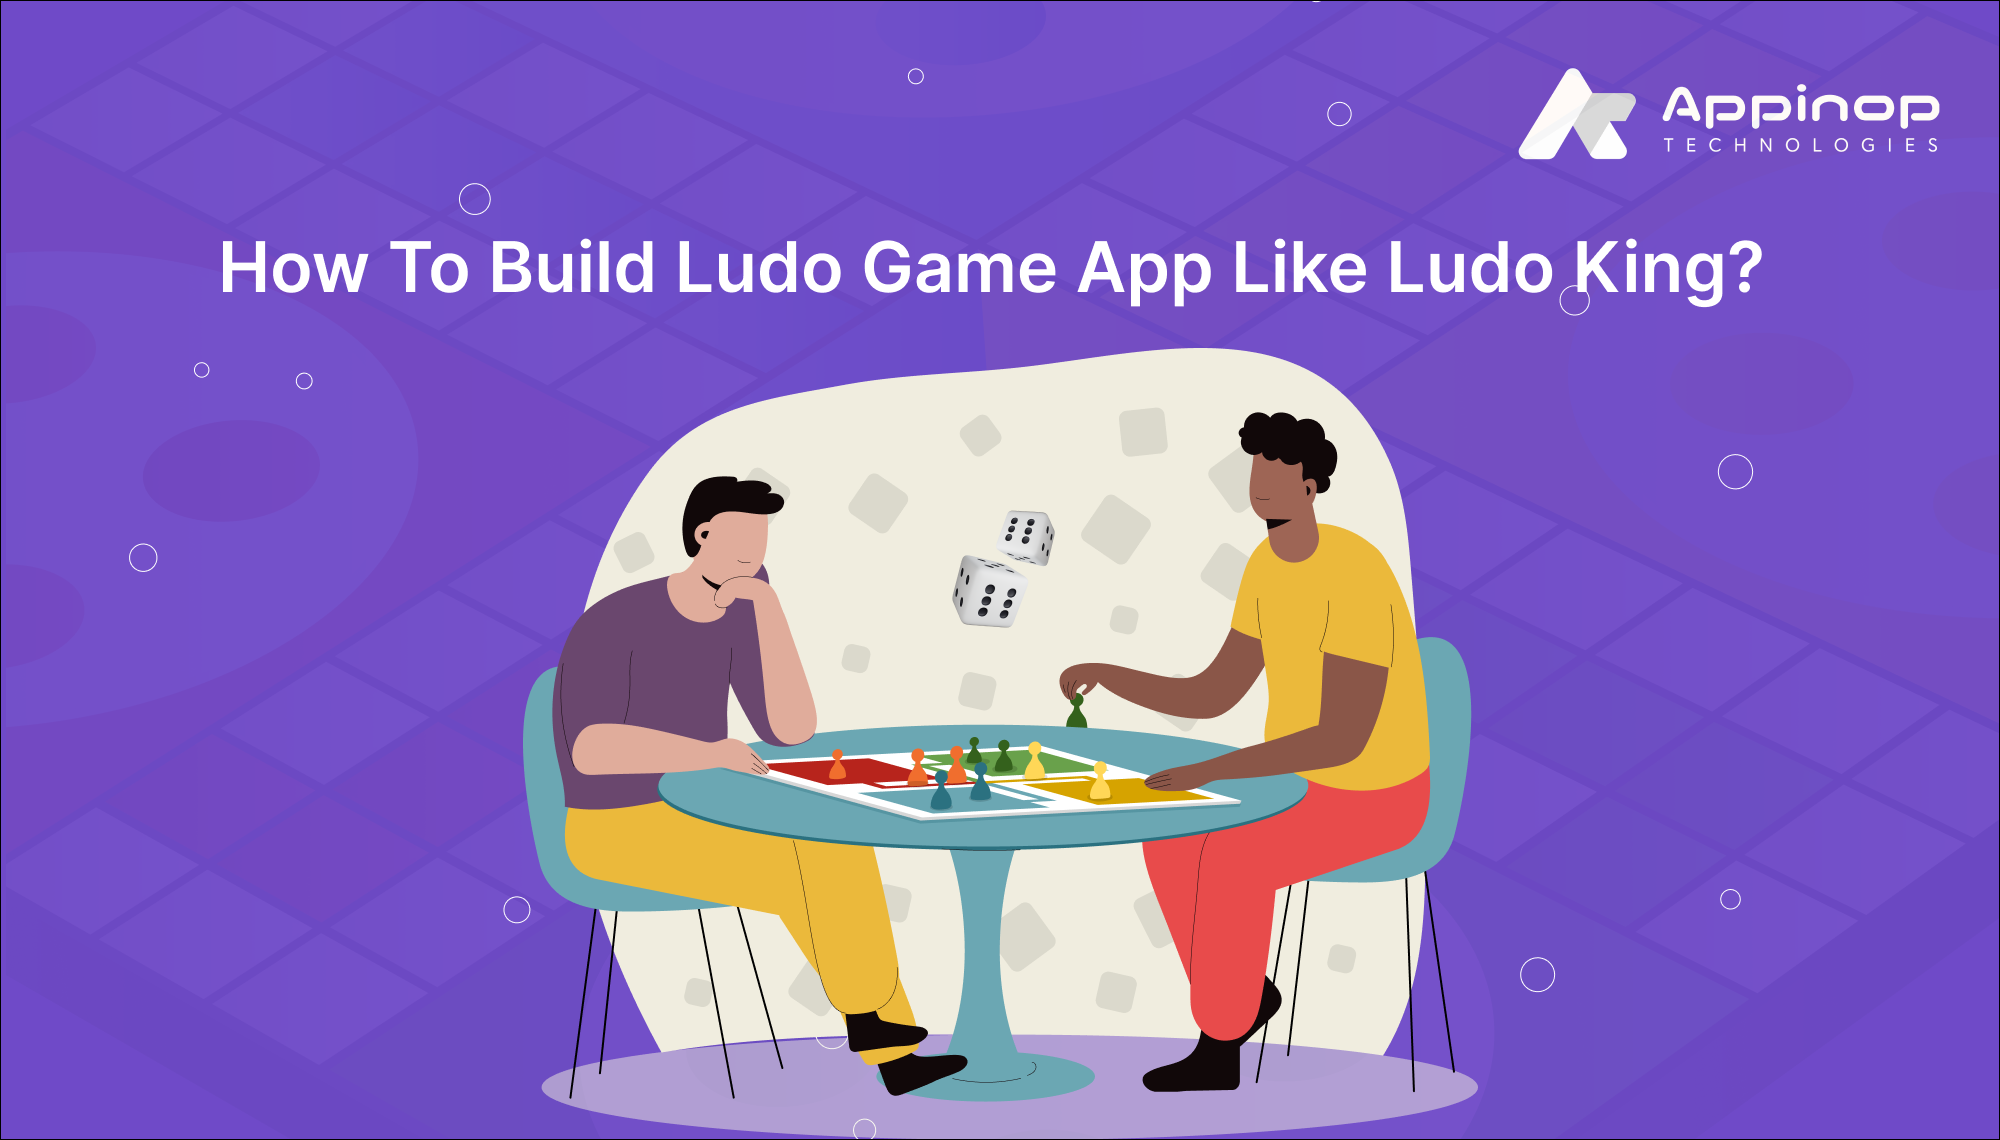 How To Build Ludo Game App Like Ludo King?